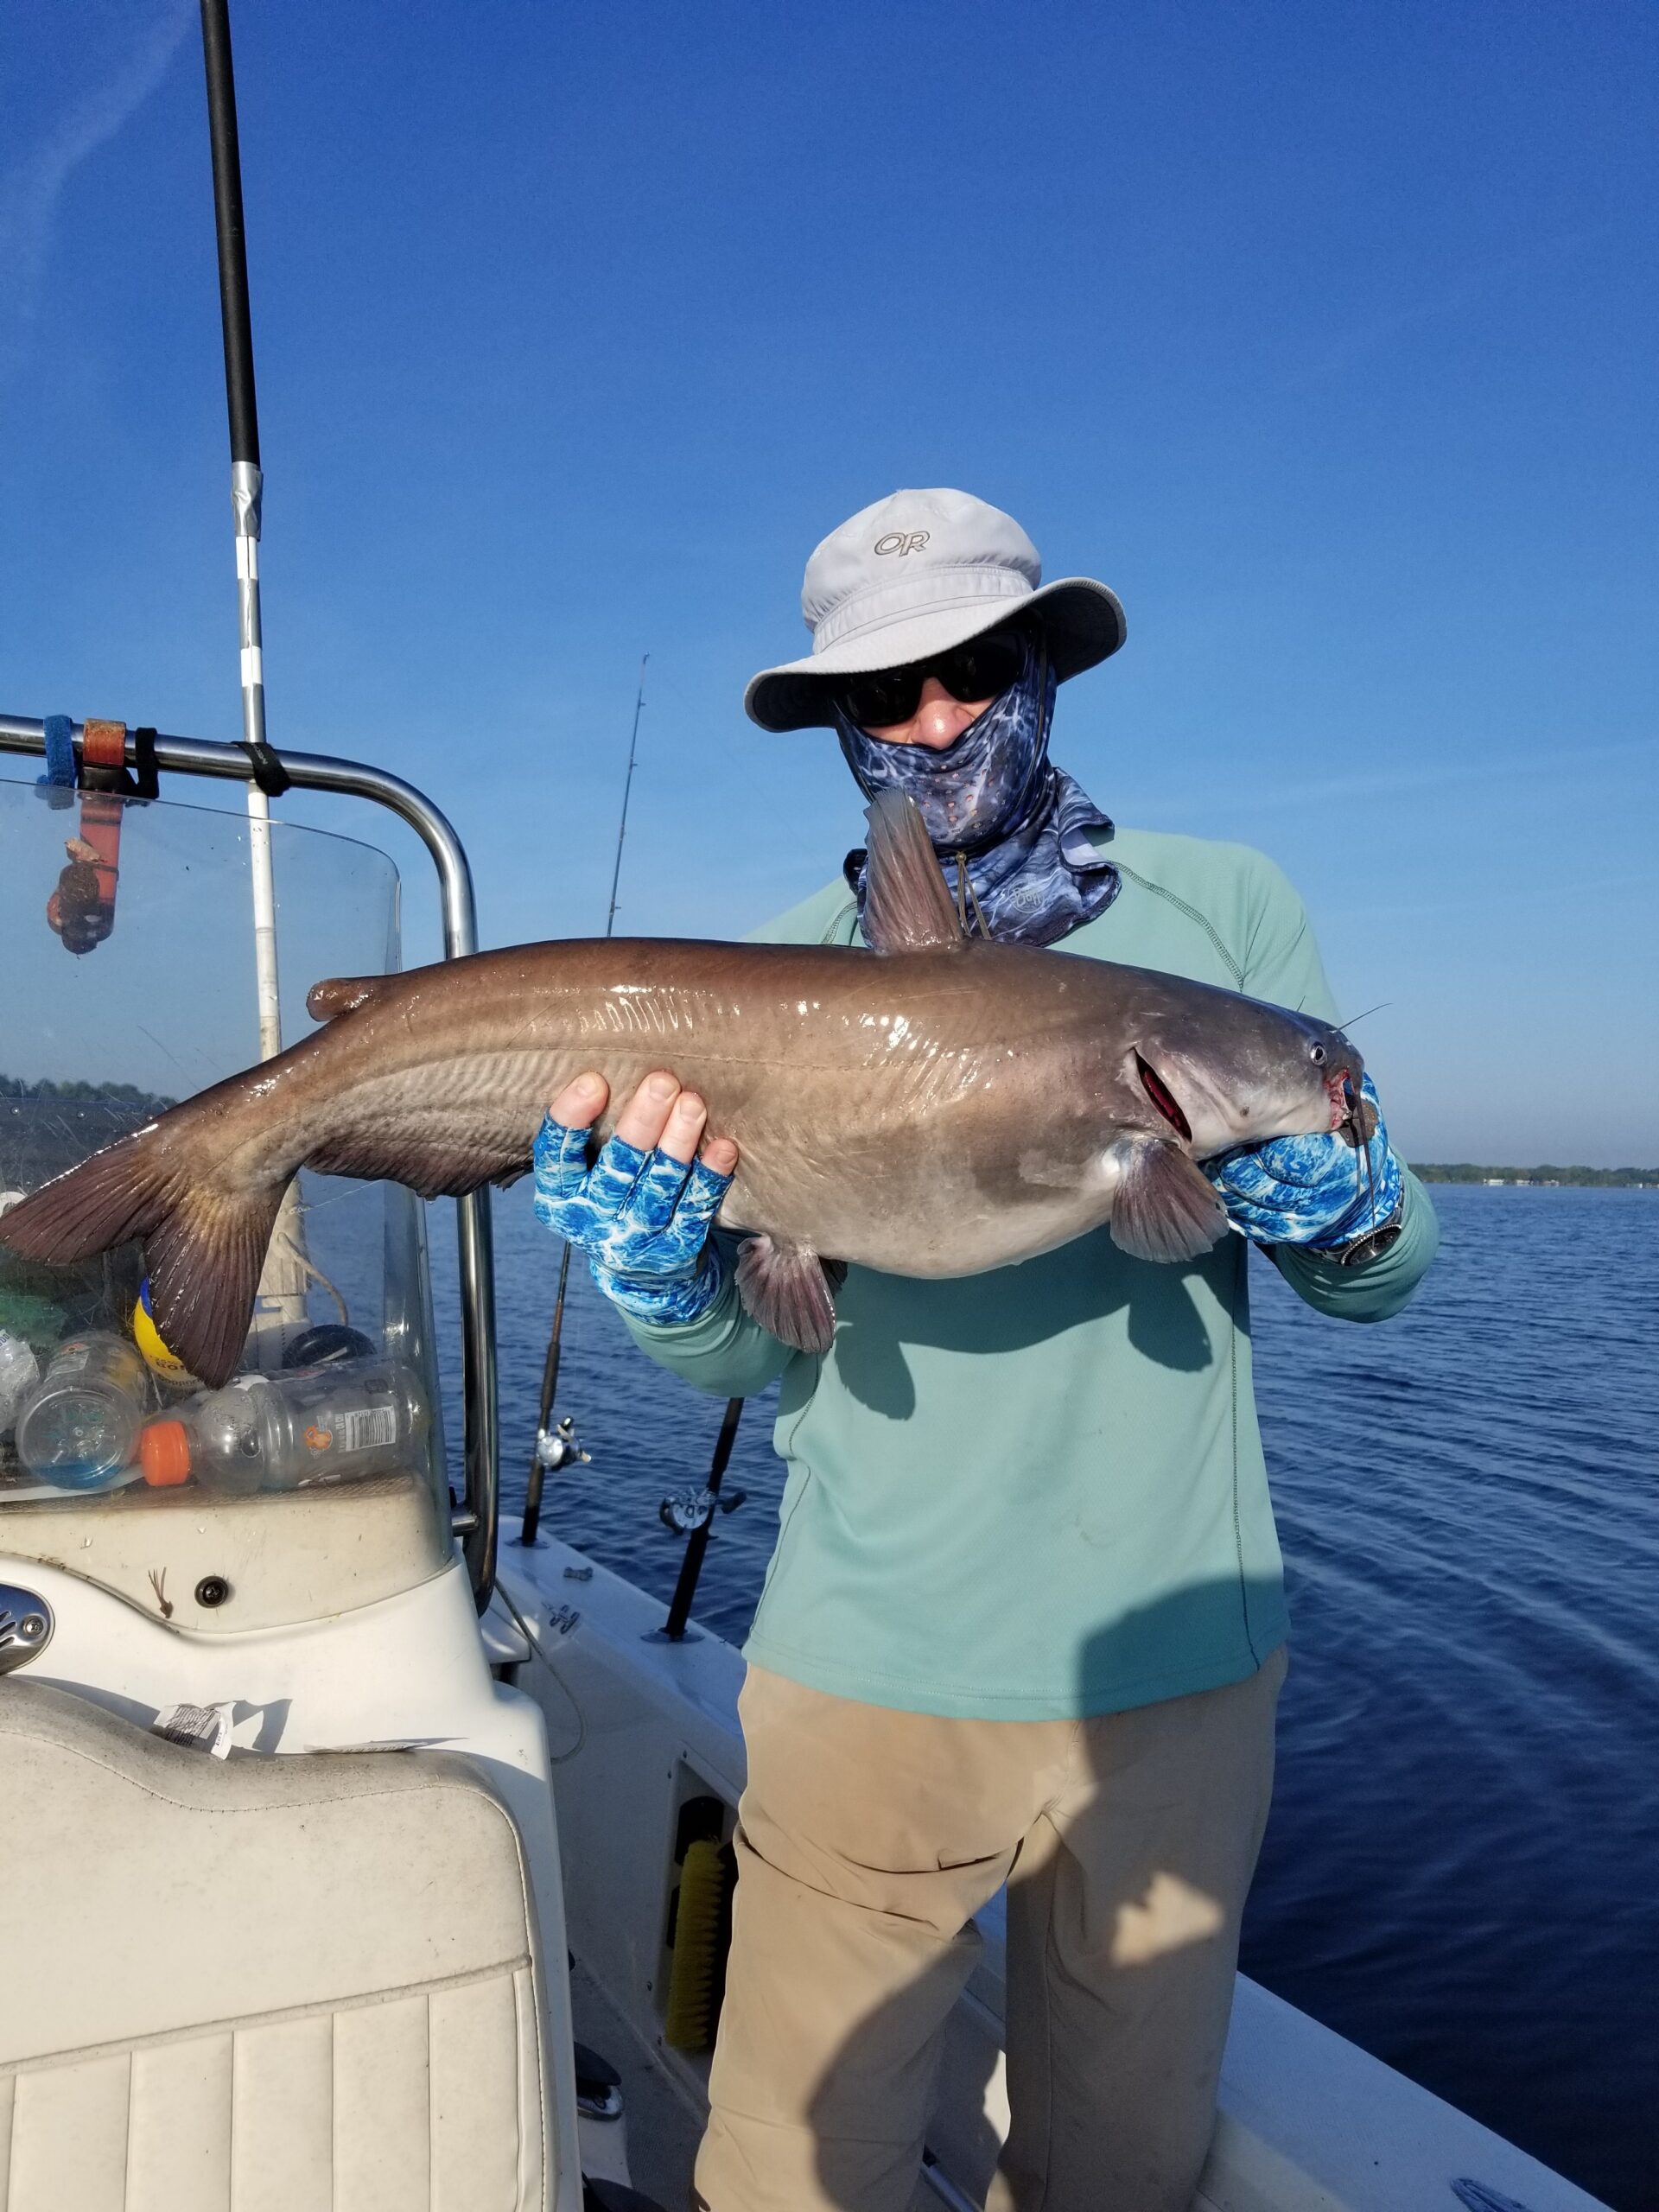 https://indianheadcharters.com/wp-content/uploads/2022/08/Santee7-scaled.jpg